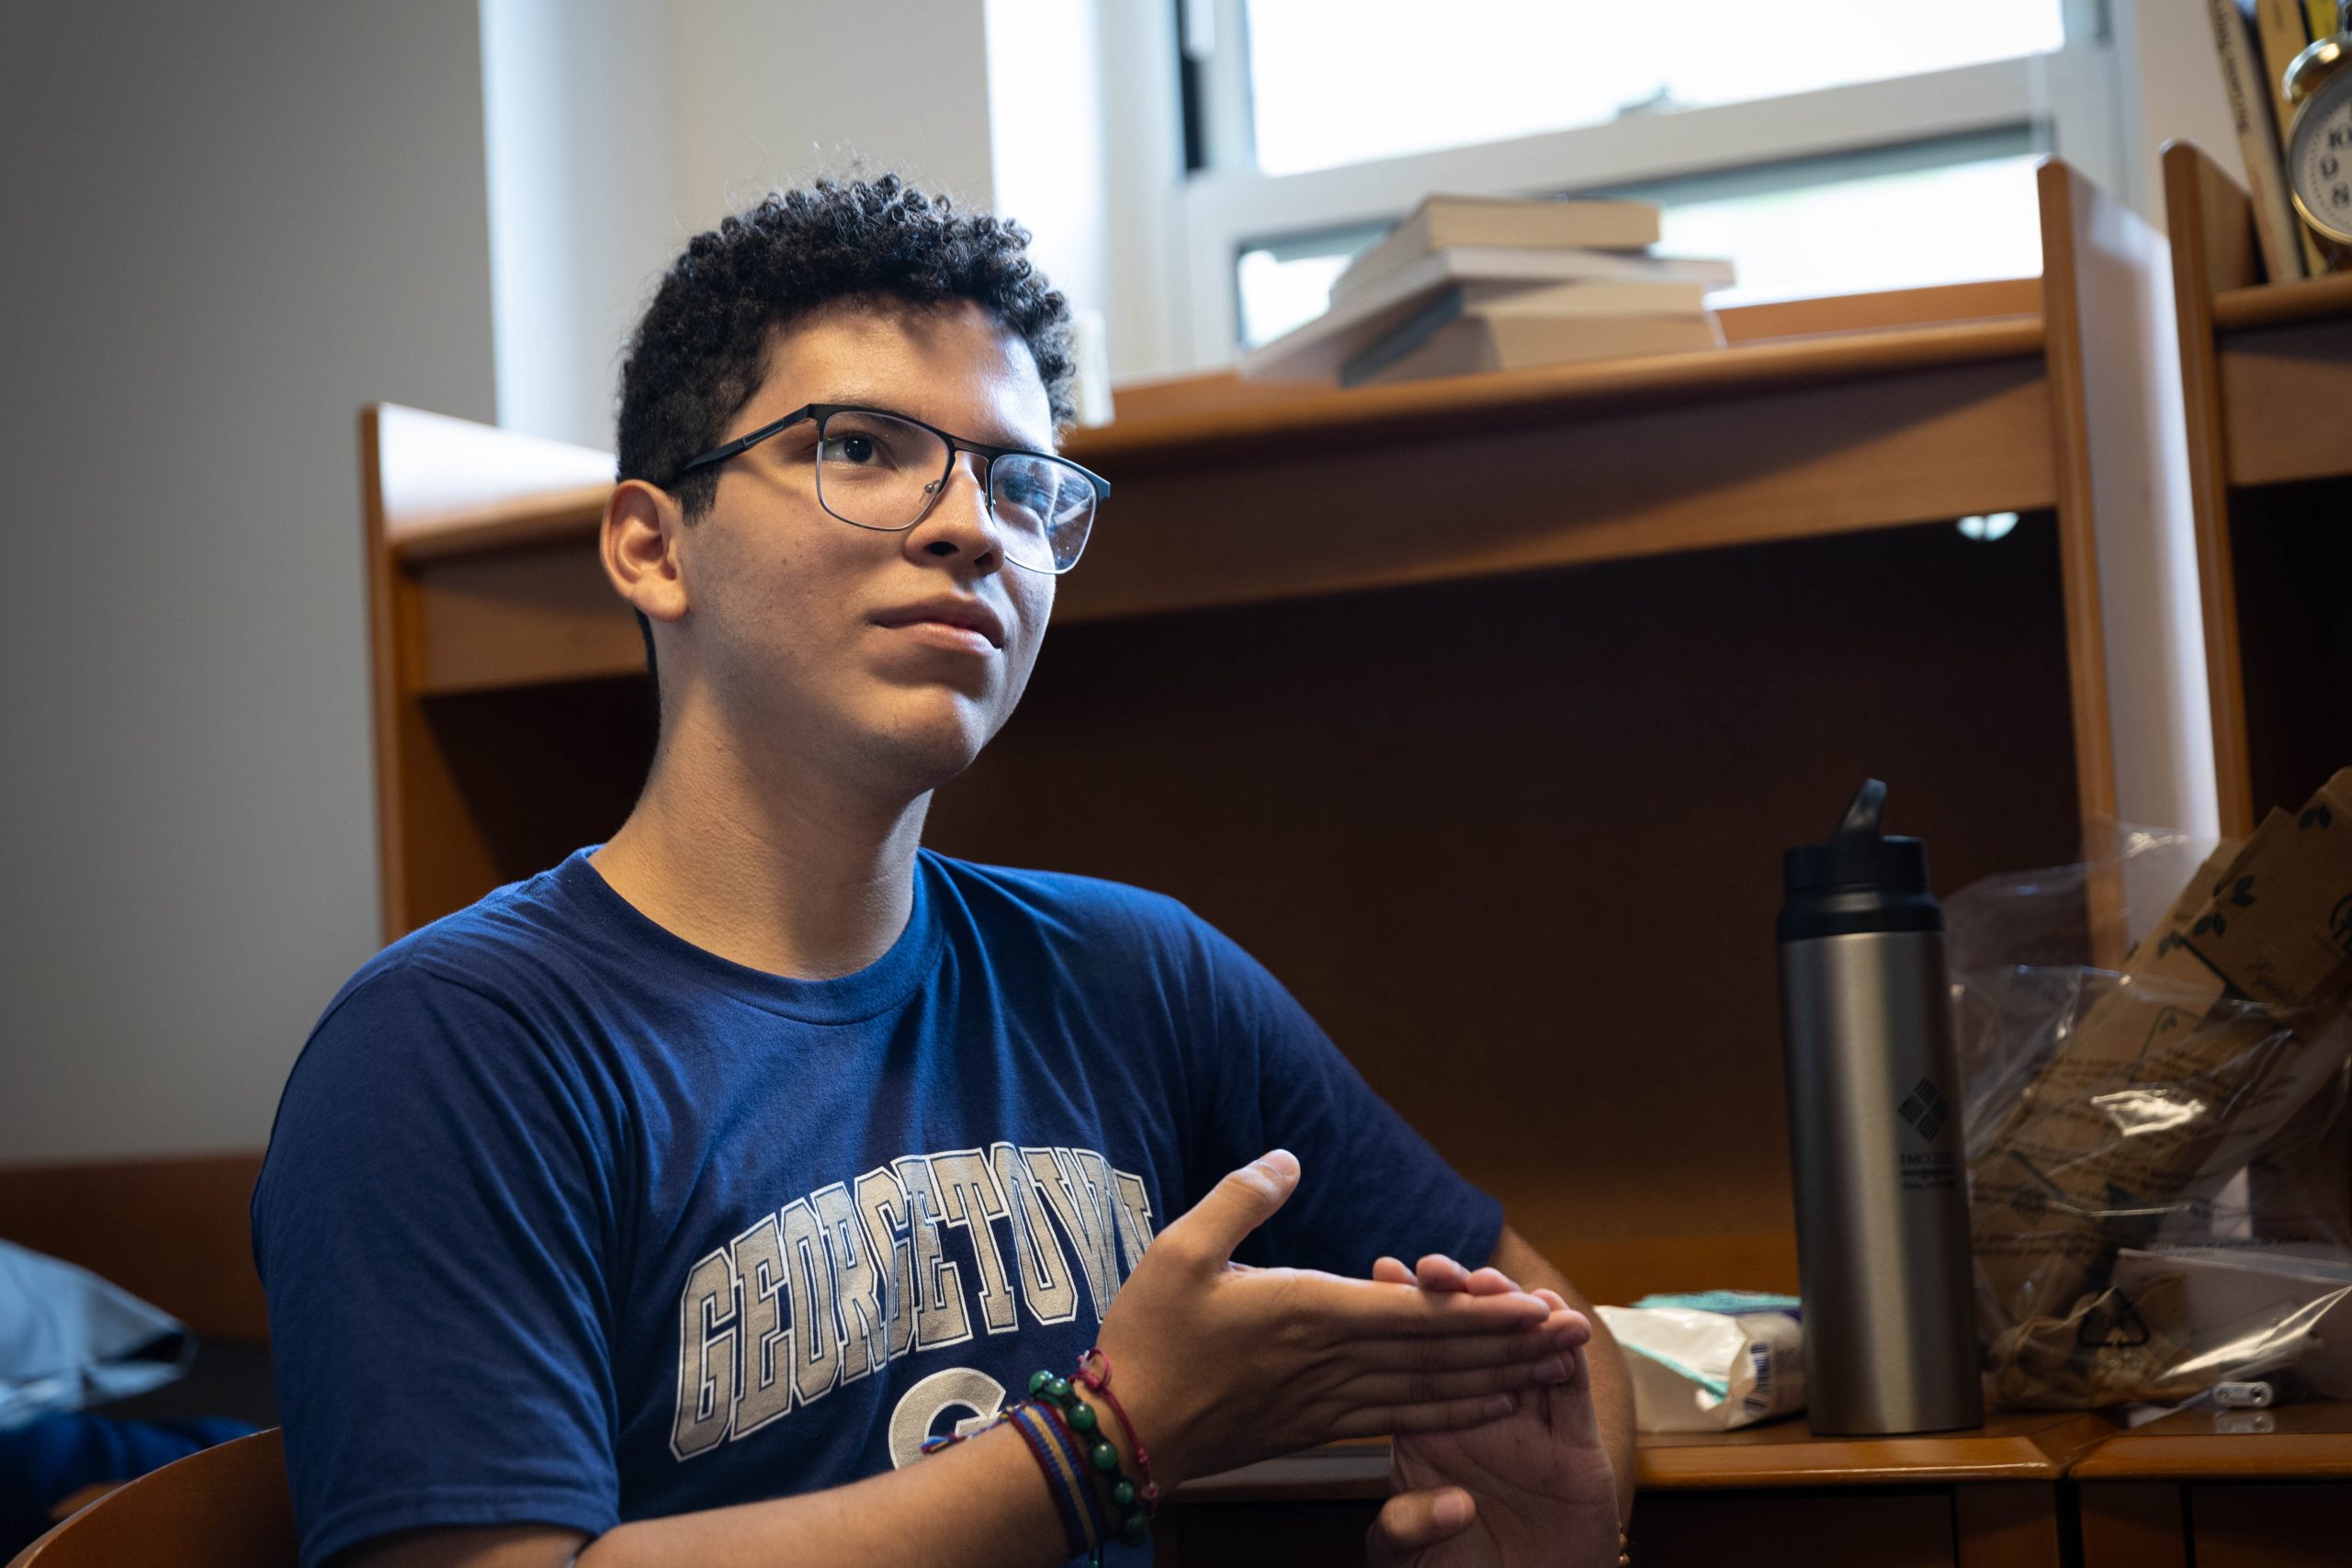 A male college student looks reflectively off-camera. He wears glasses and a blue Georgetown T-shirt.